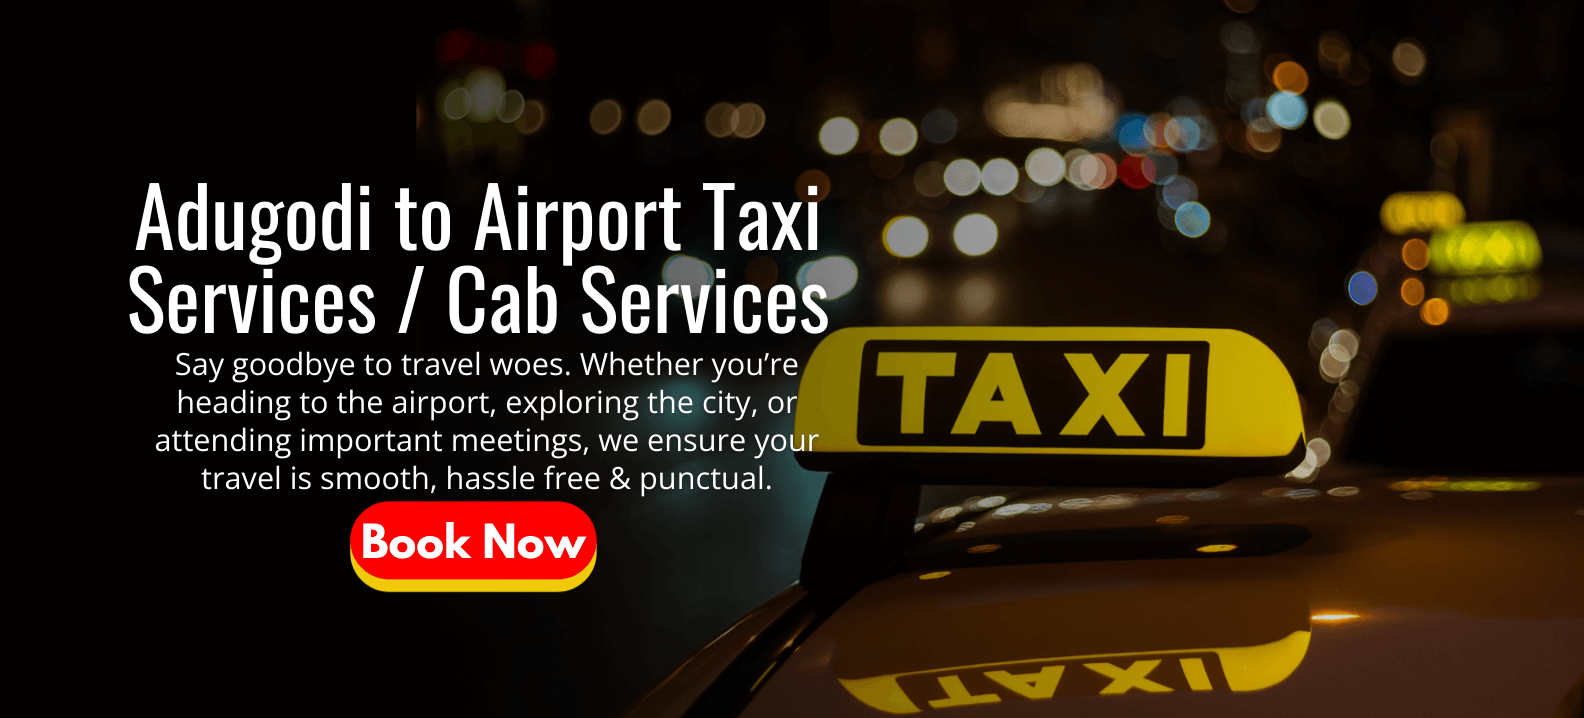 Adugodi to Airport Taxi Services _ Cab Services